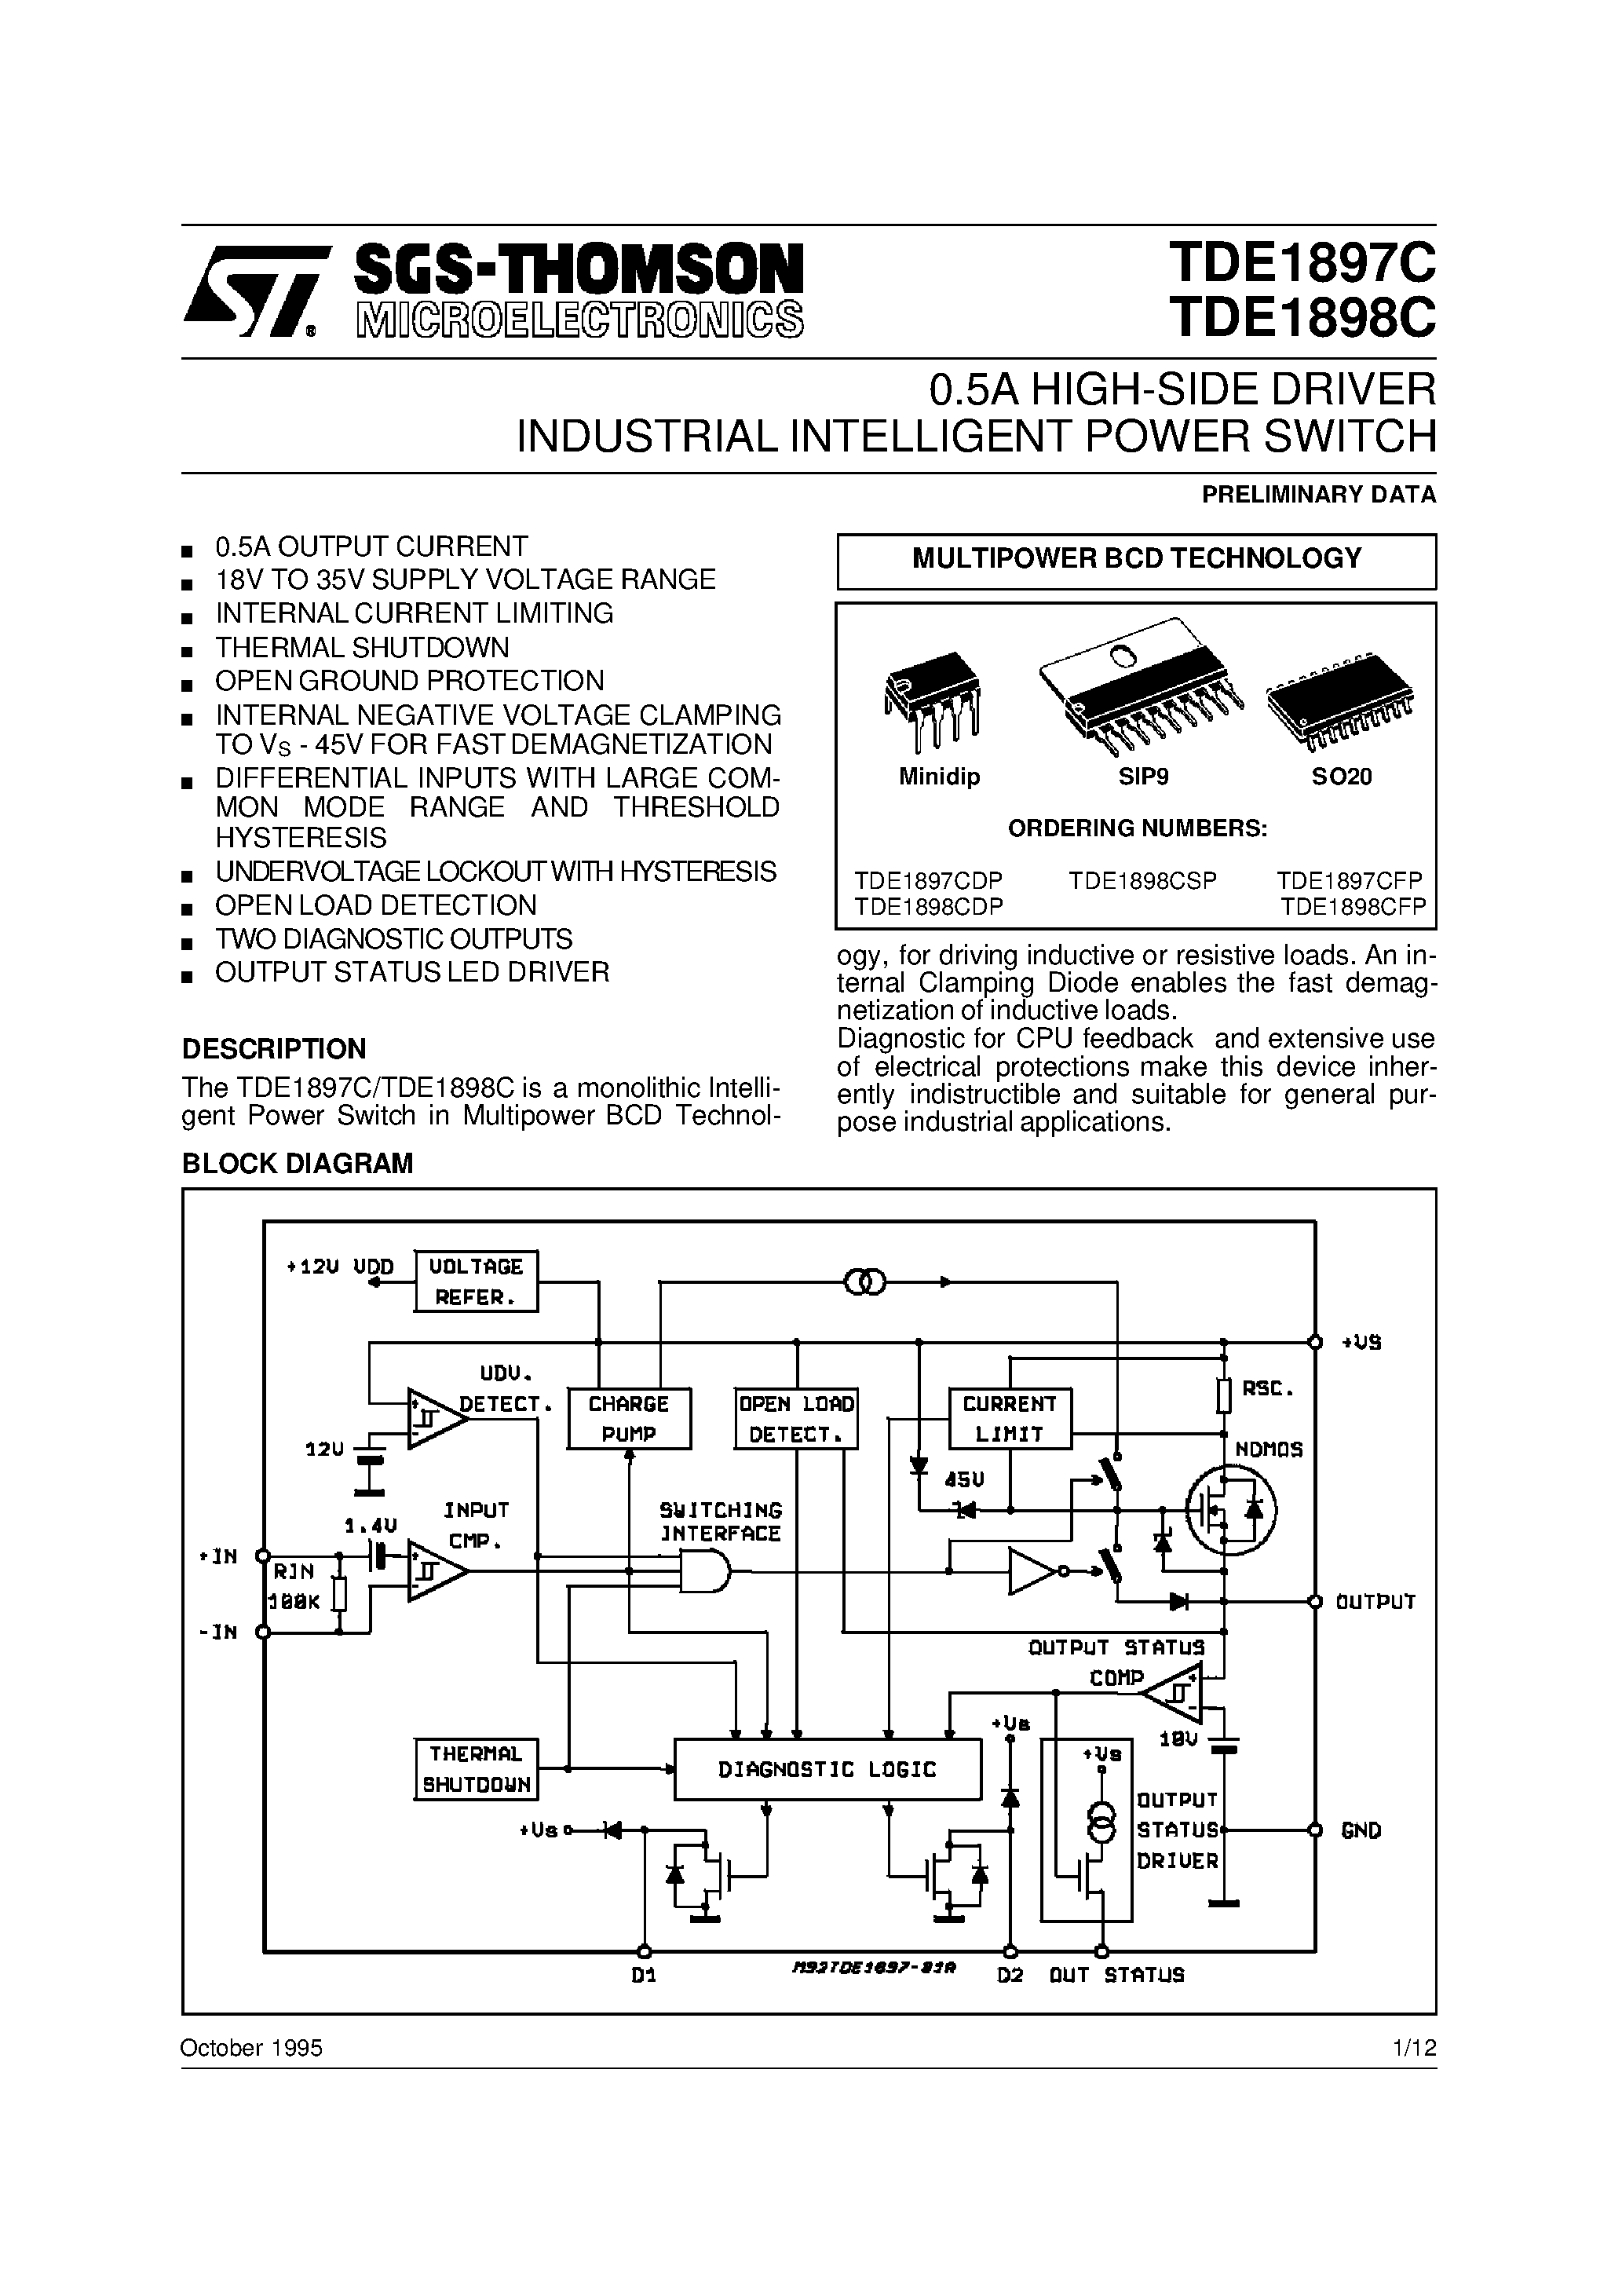 Datasheet TDE1898CFP - 0.5A HIGH-SIDE DRIVER INDUSTRIAL INTELLIGENT POWER SWITCH page 1